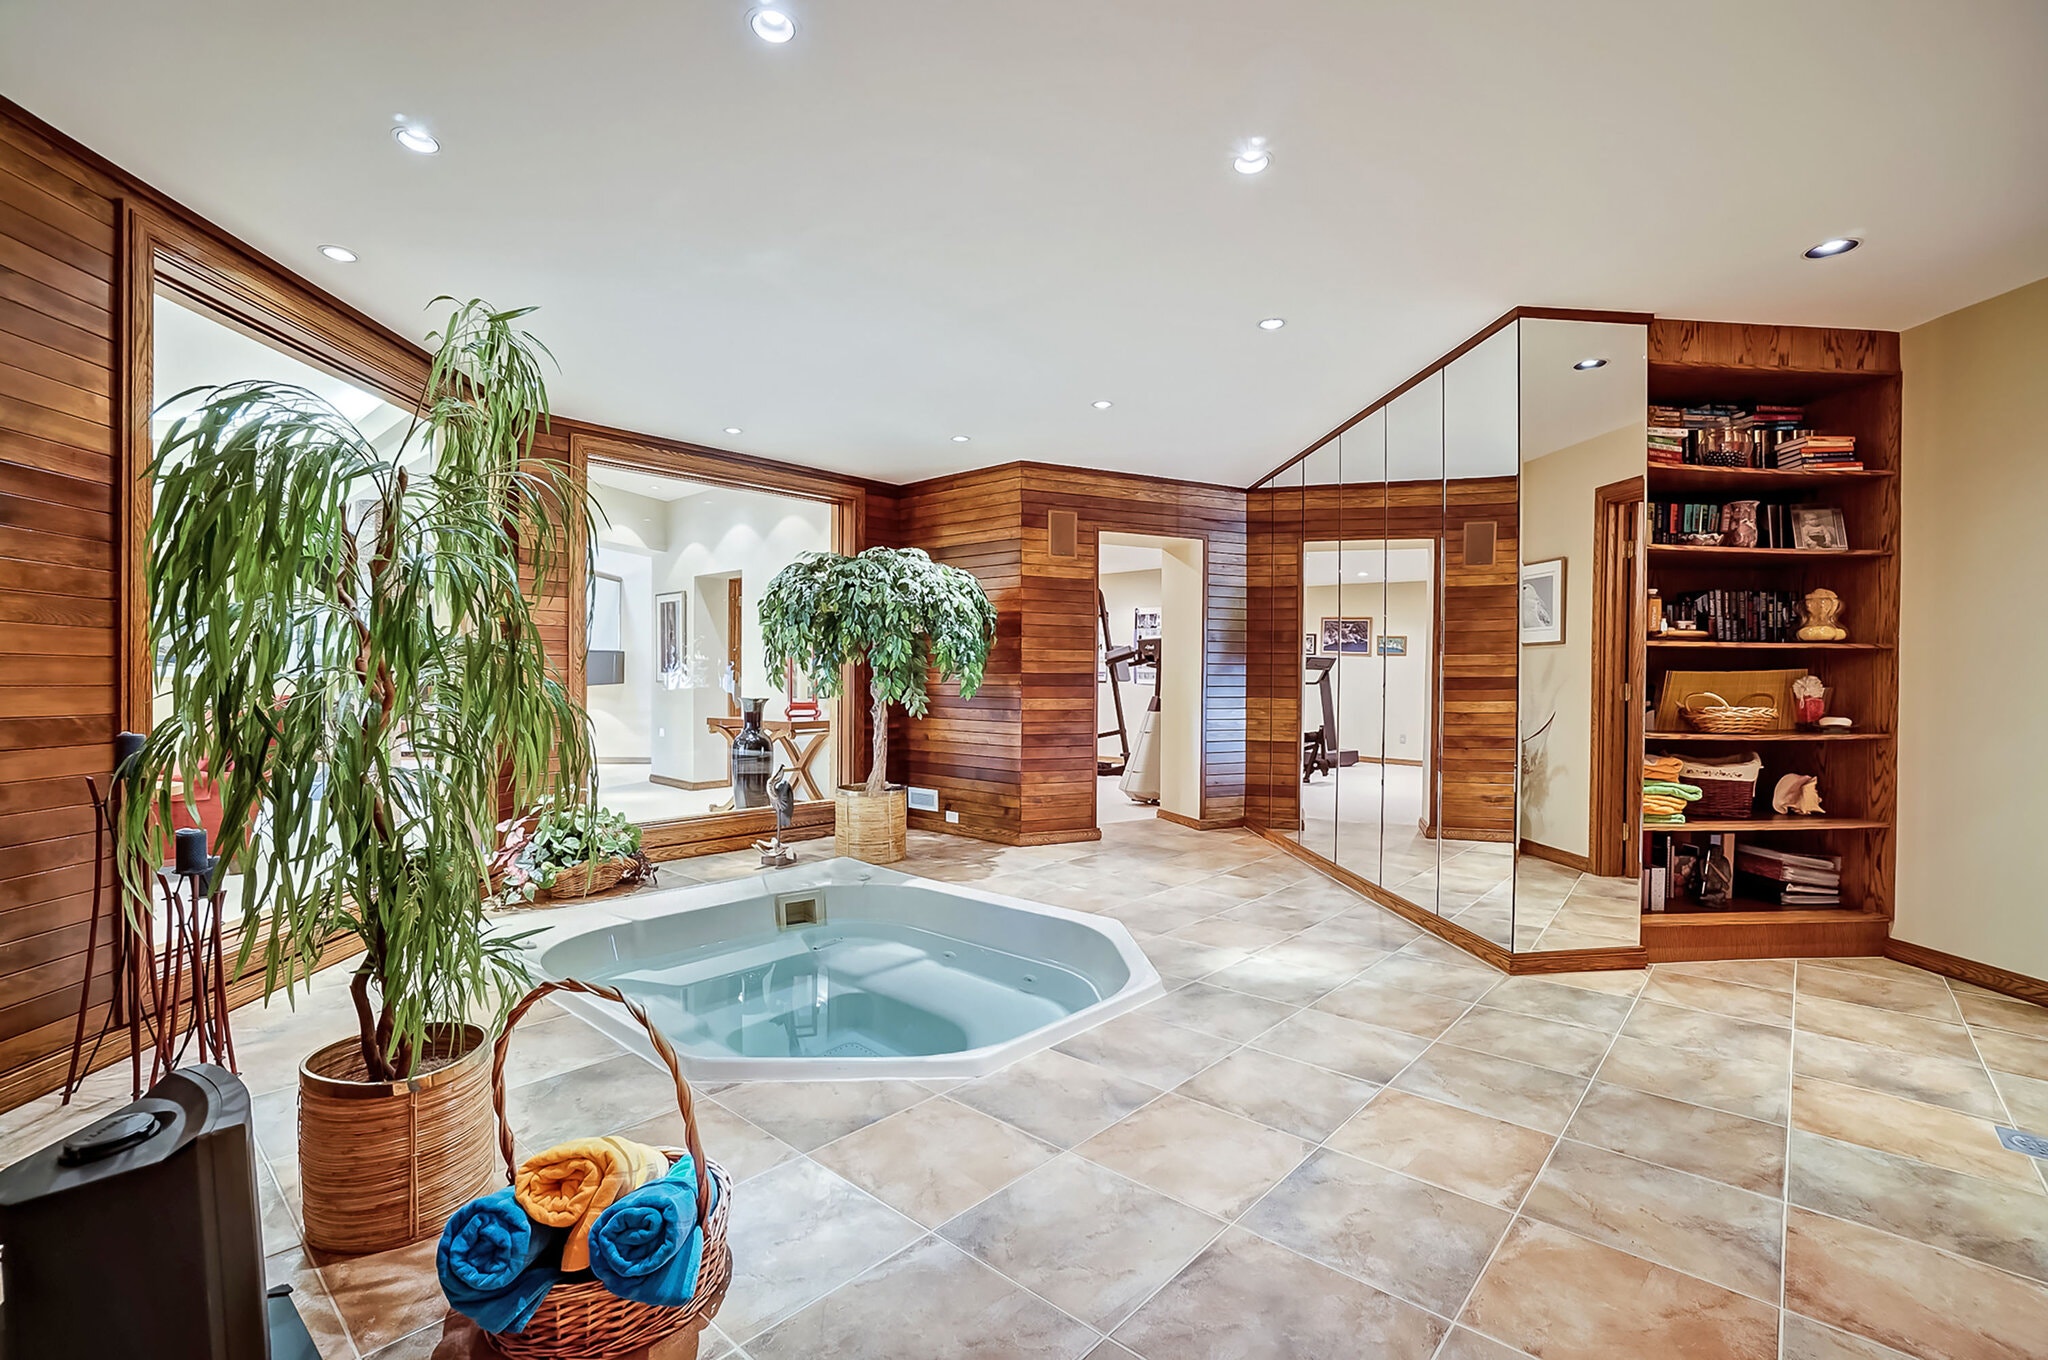 The lower level also features a glass-enclosed Jacuzzi tub with built-in shelving for storage.